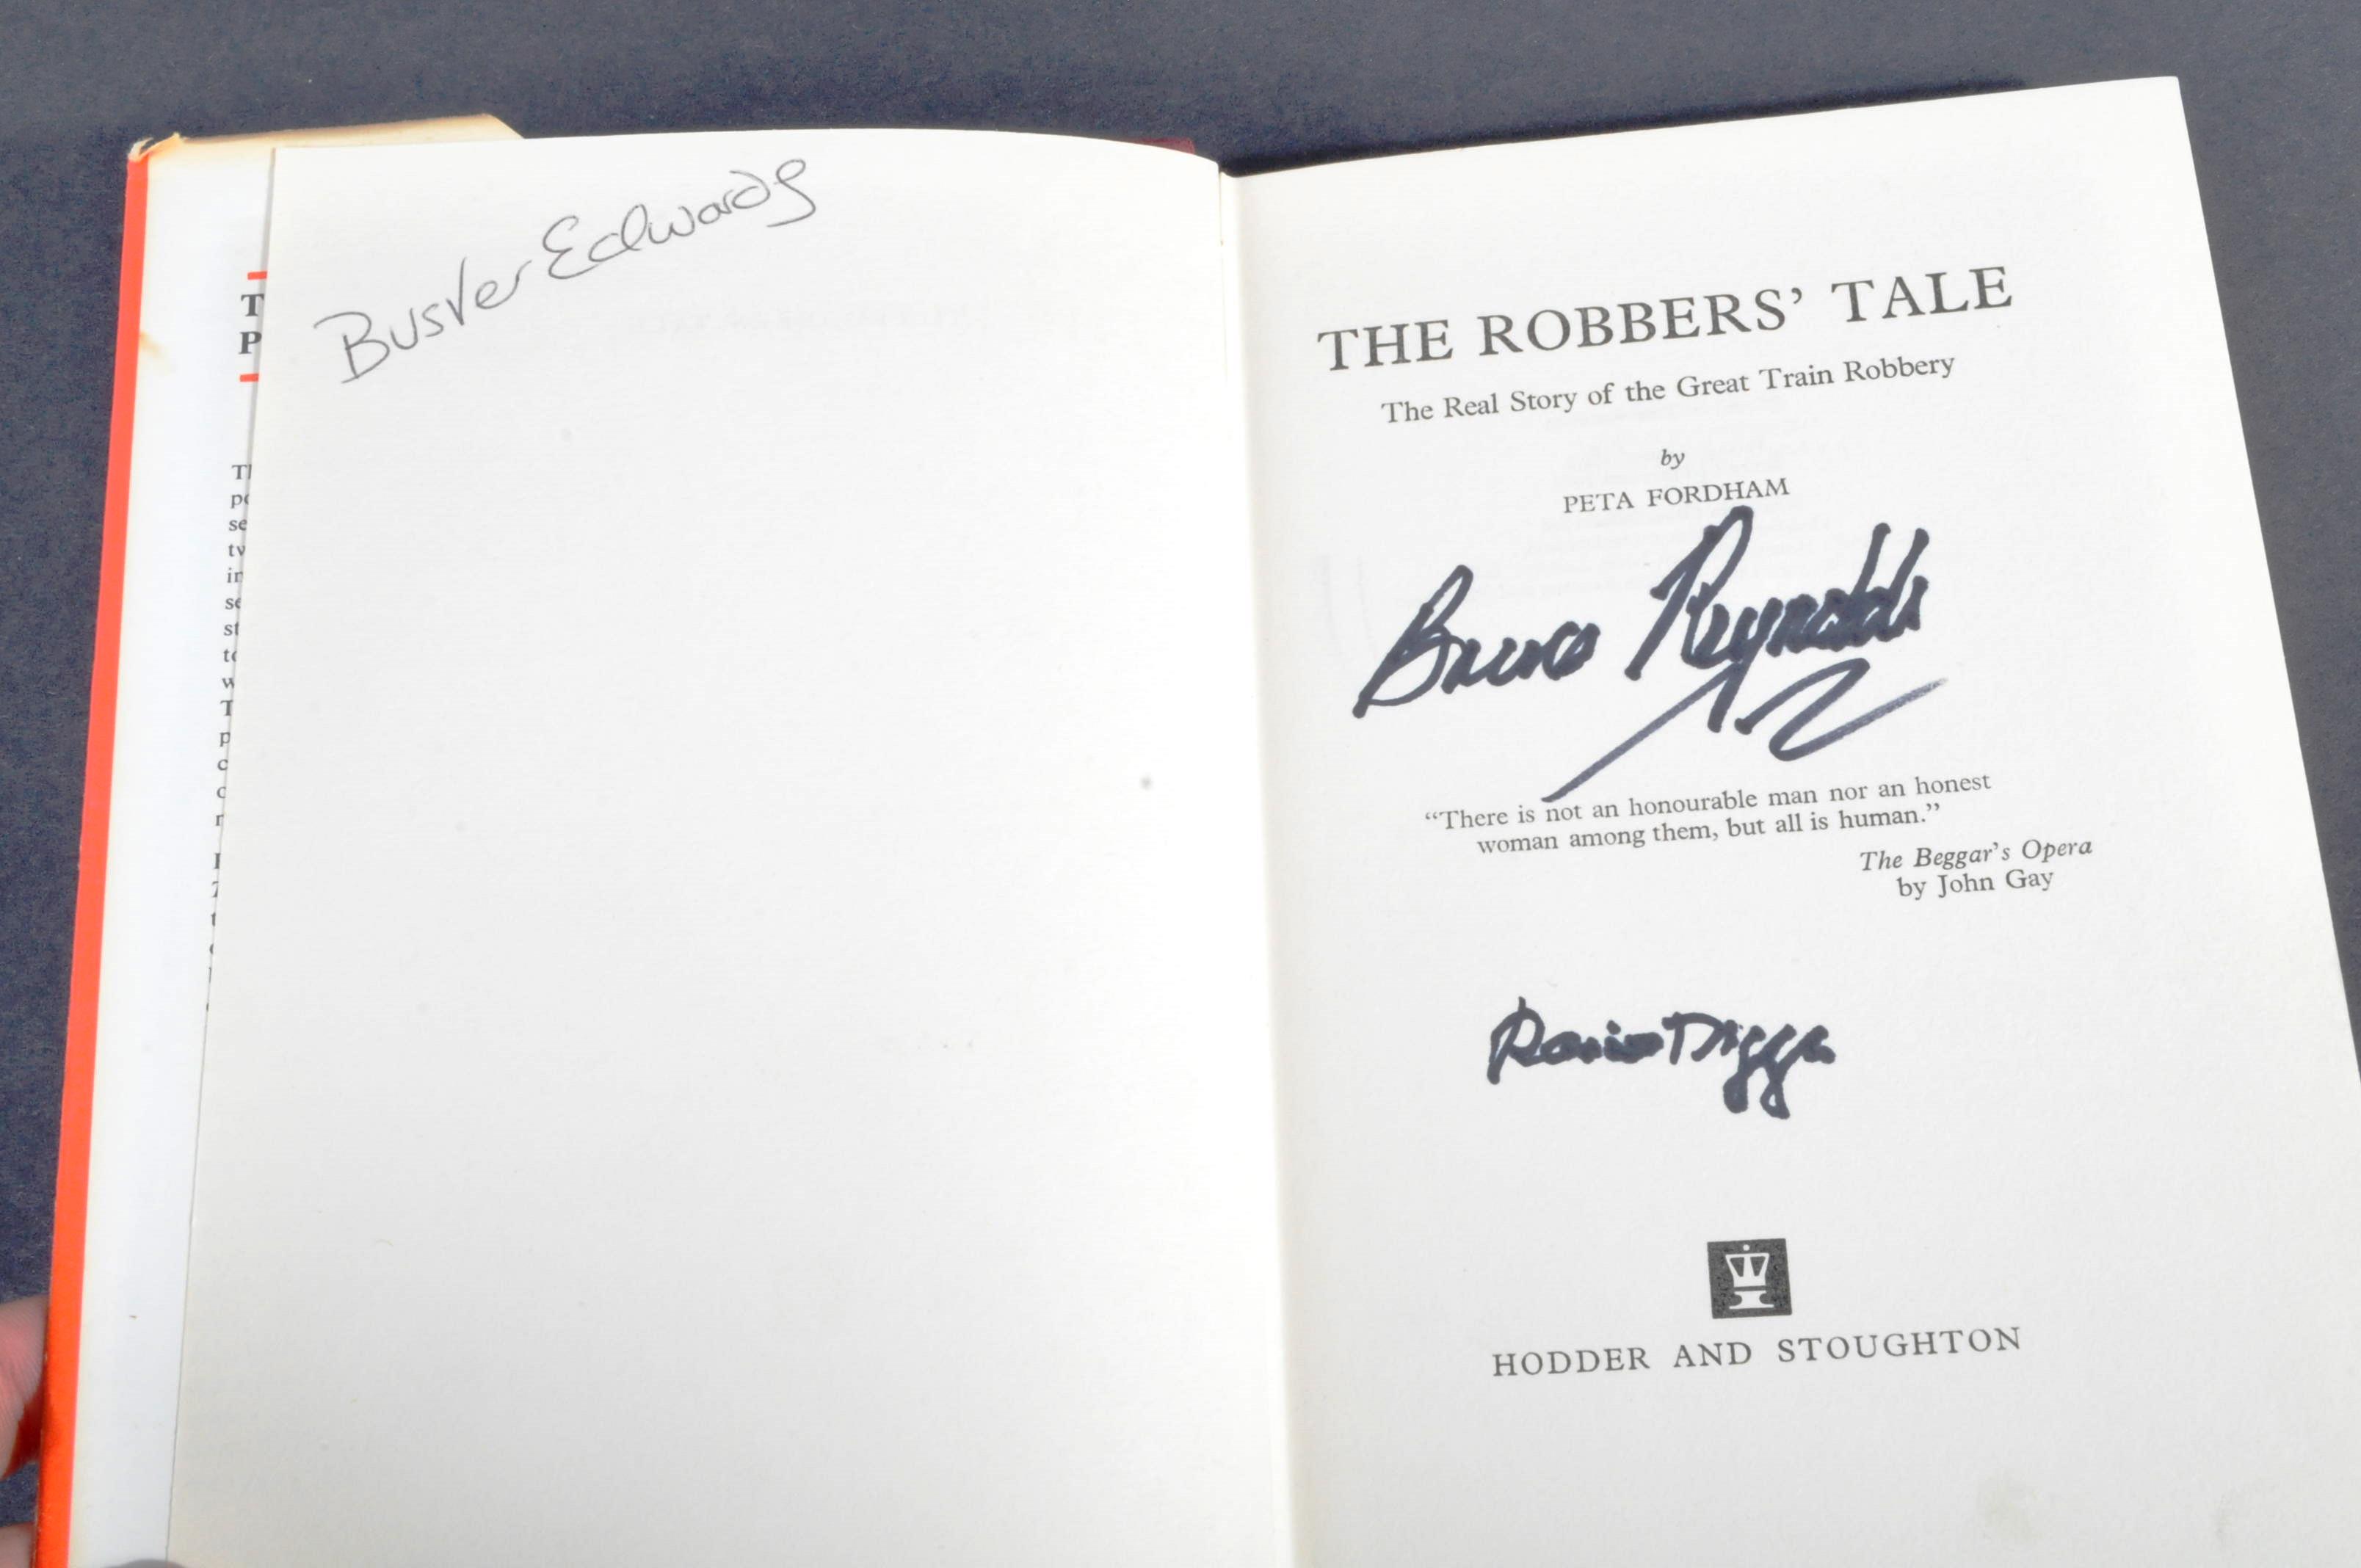 THE GREAT TRAIN ROBBERY - THE ROBBERS TALE SIGNED BOOK - Image 2 of 5